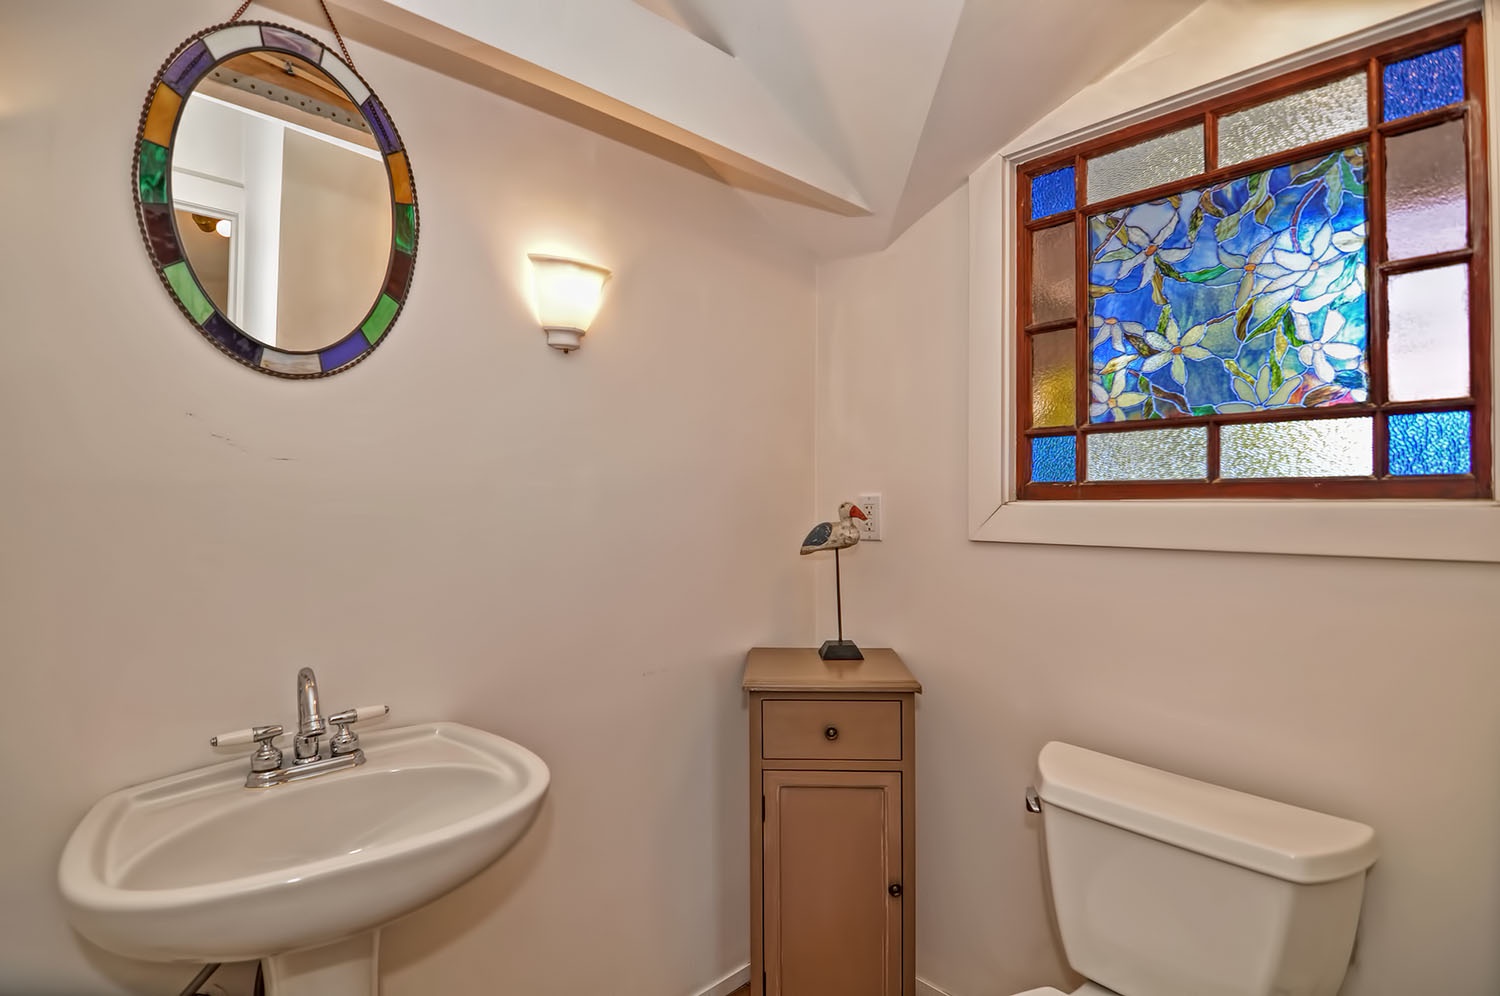 Main floor half bath with a stained glass window.